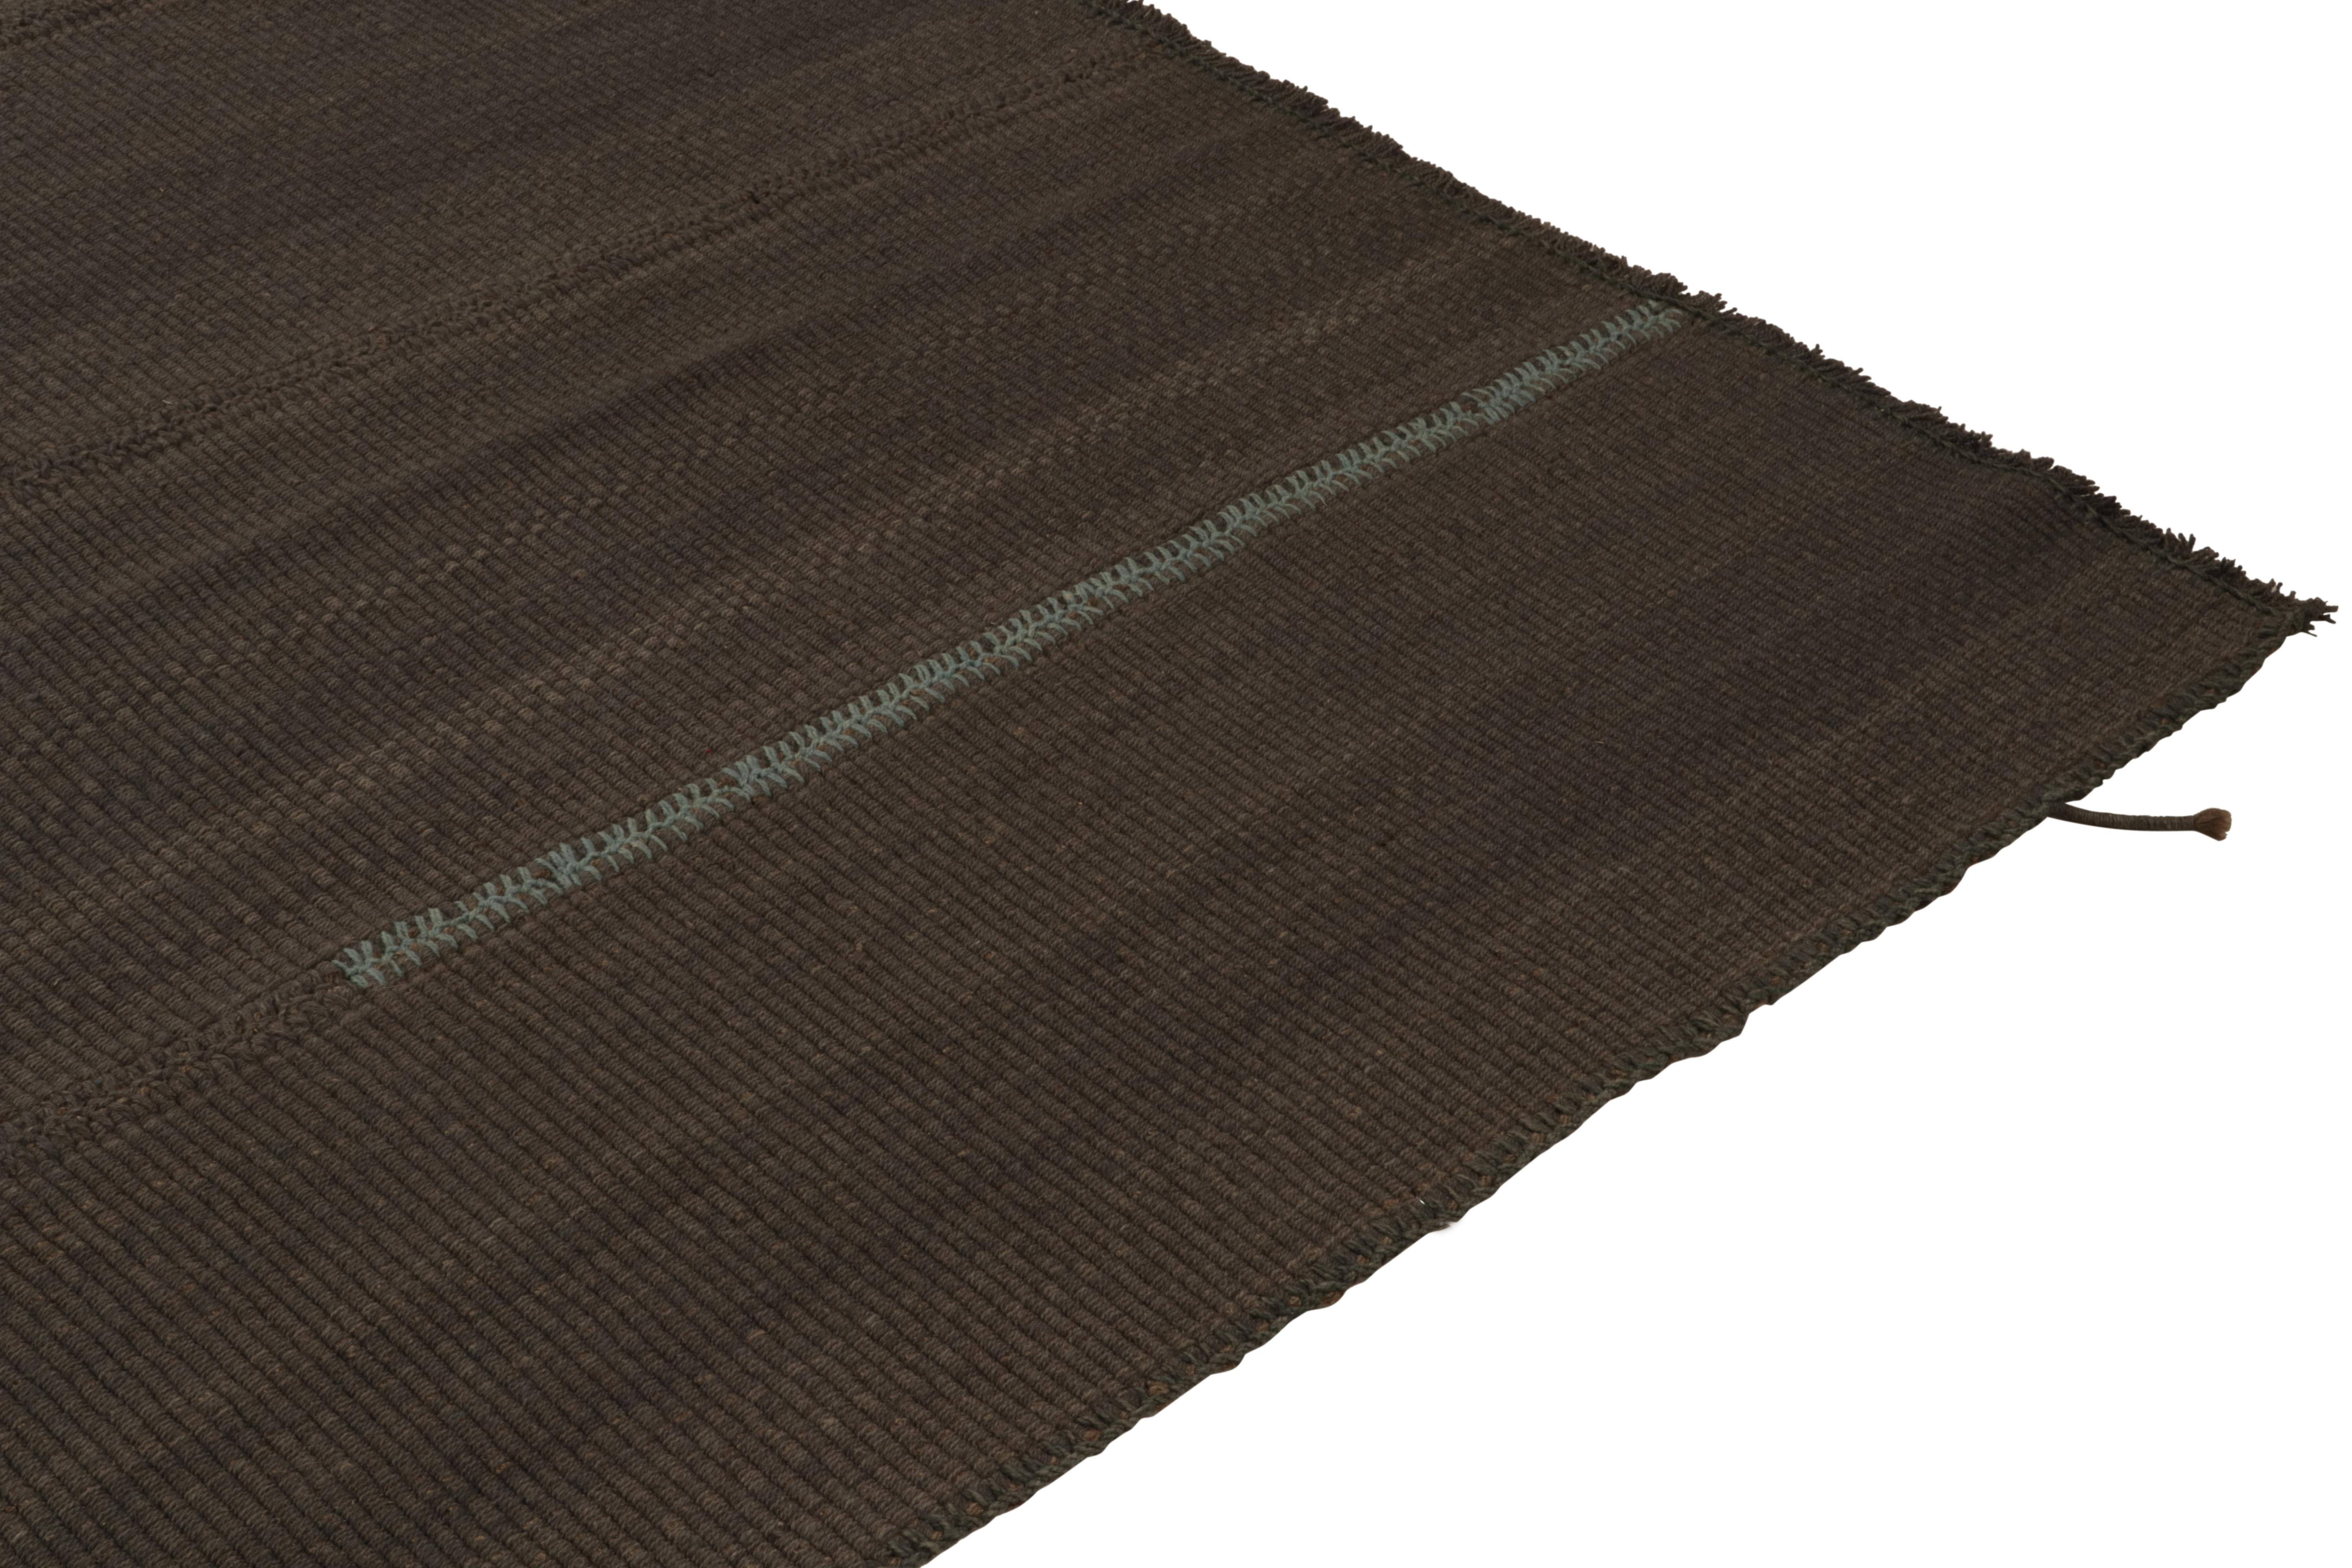 Rug & Kilim's Contemporary Oversized Kilim in Brown Muted Stripes, Blue Accents (Afghanisch) im Angebot